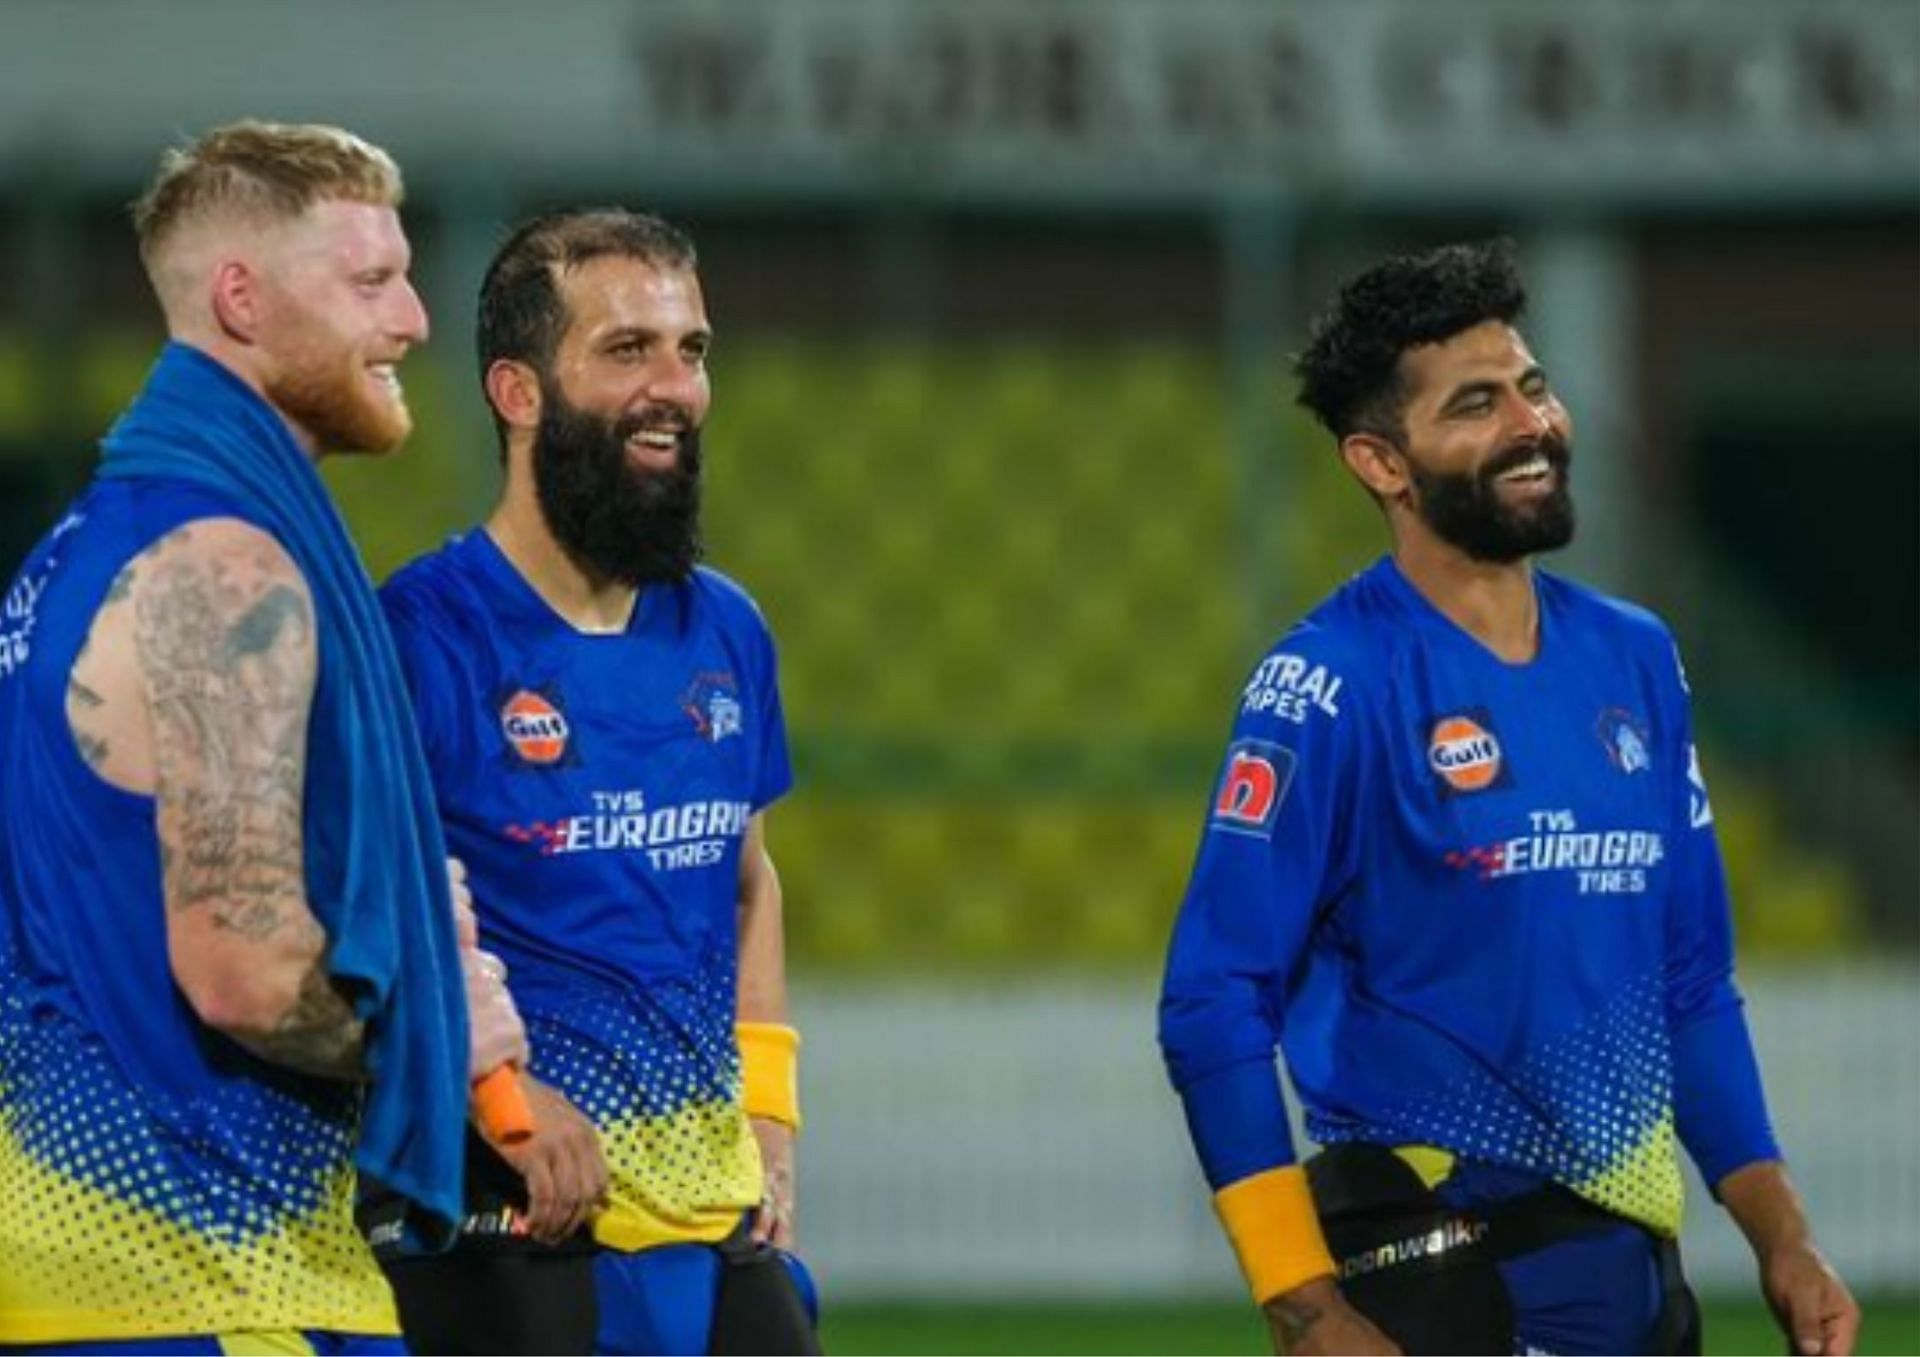 Ben Stokes, Moeen Ali and Ravindra Jadeja will turn out for CSK in IPL 2023 (Picture Credits: IPL).